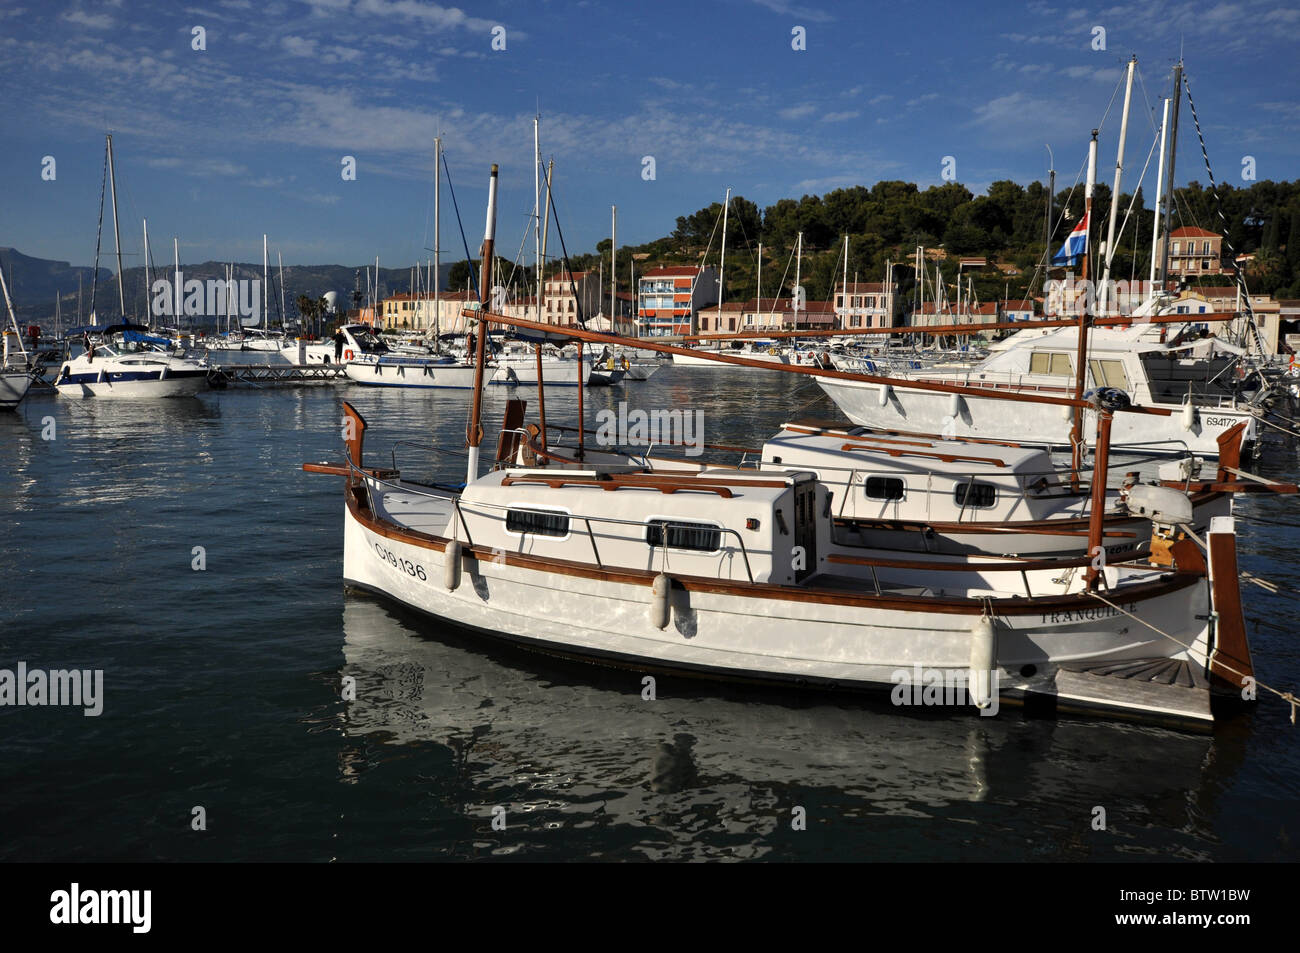 Harbour from St Mandrier, France Stock Photo - Alamy